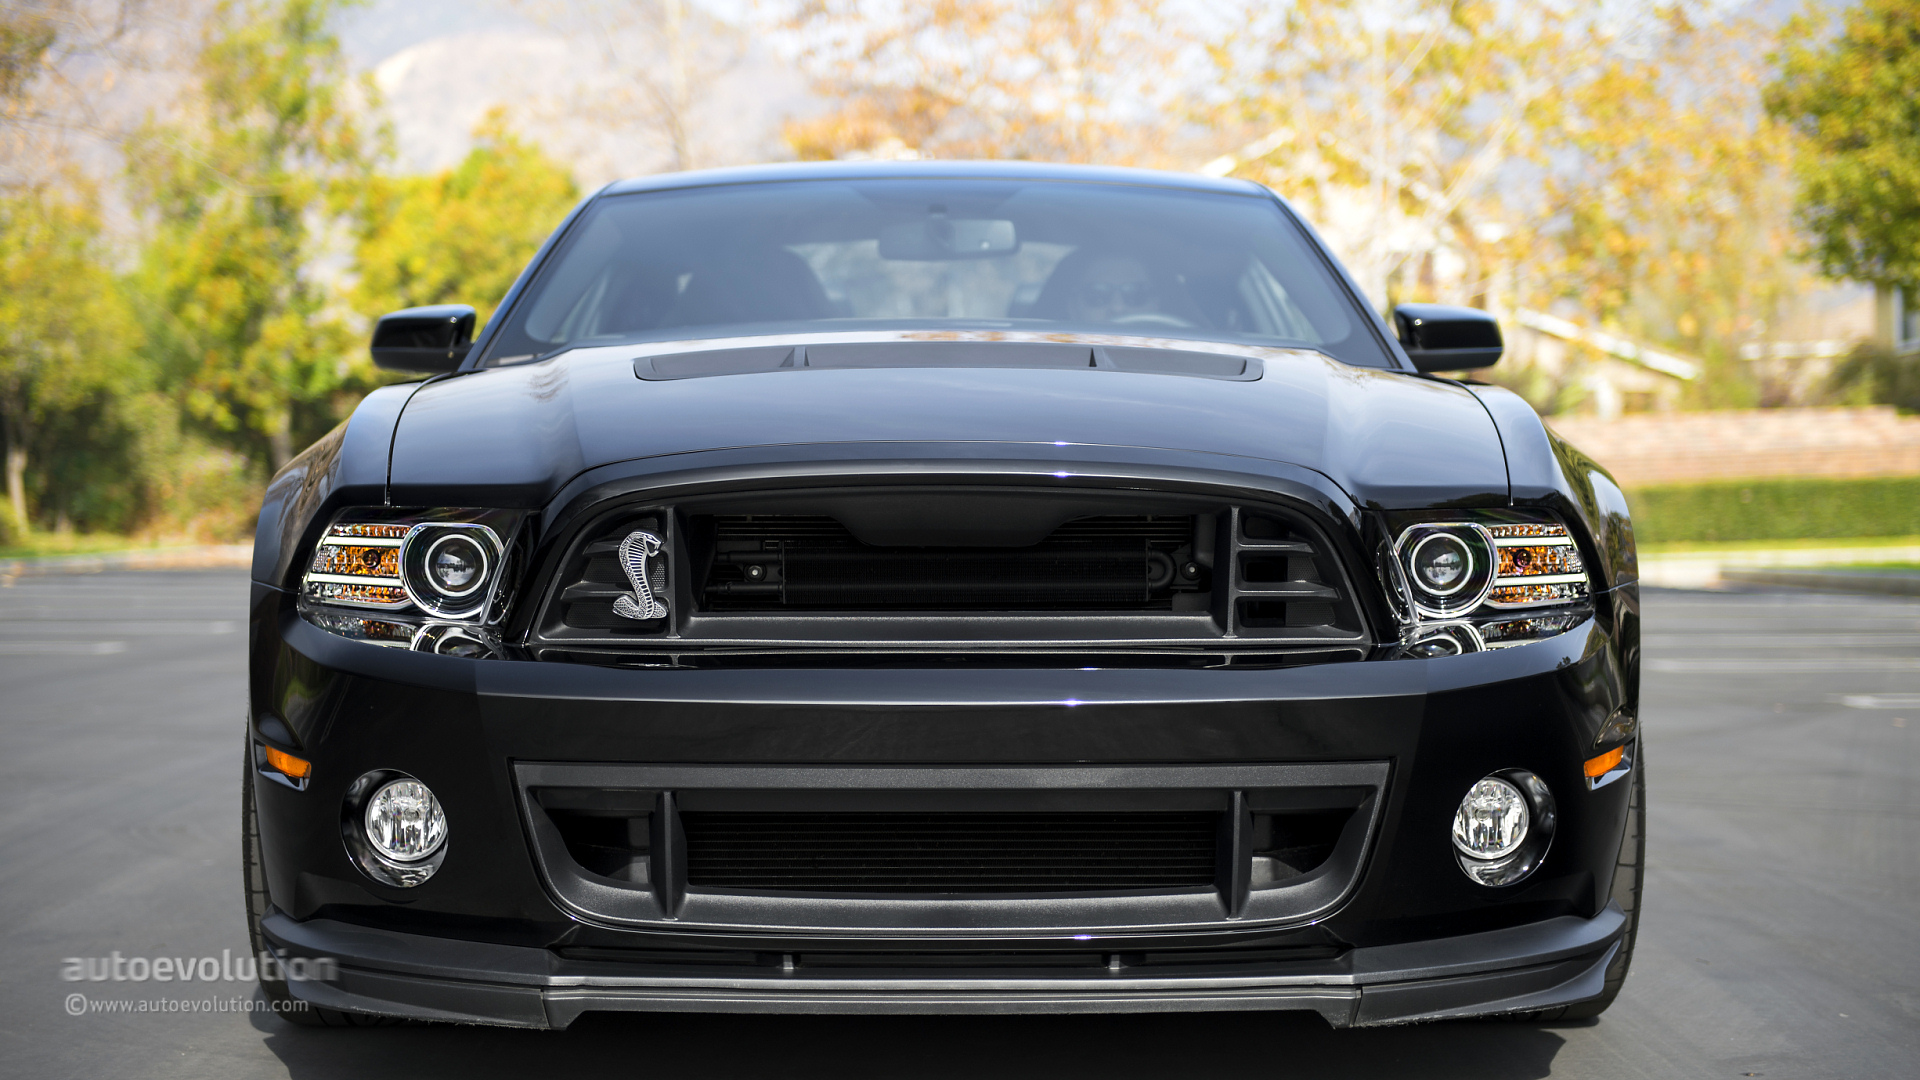 2014 Ford Mustang Shelby Gt500 Saleen 351 Extreme Car